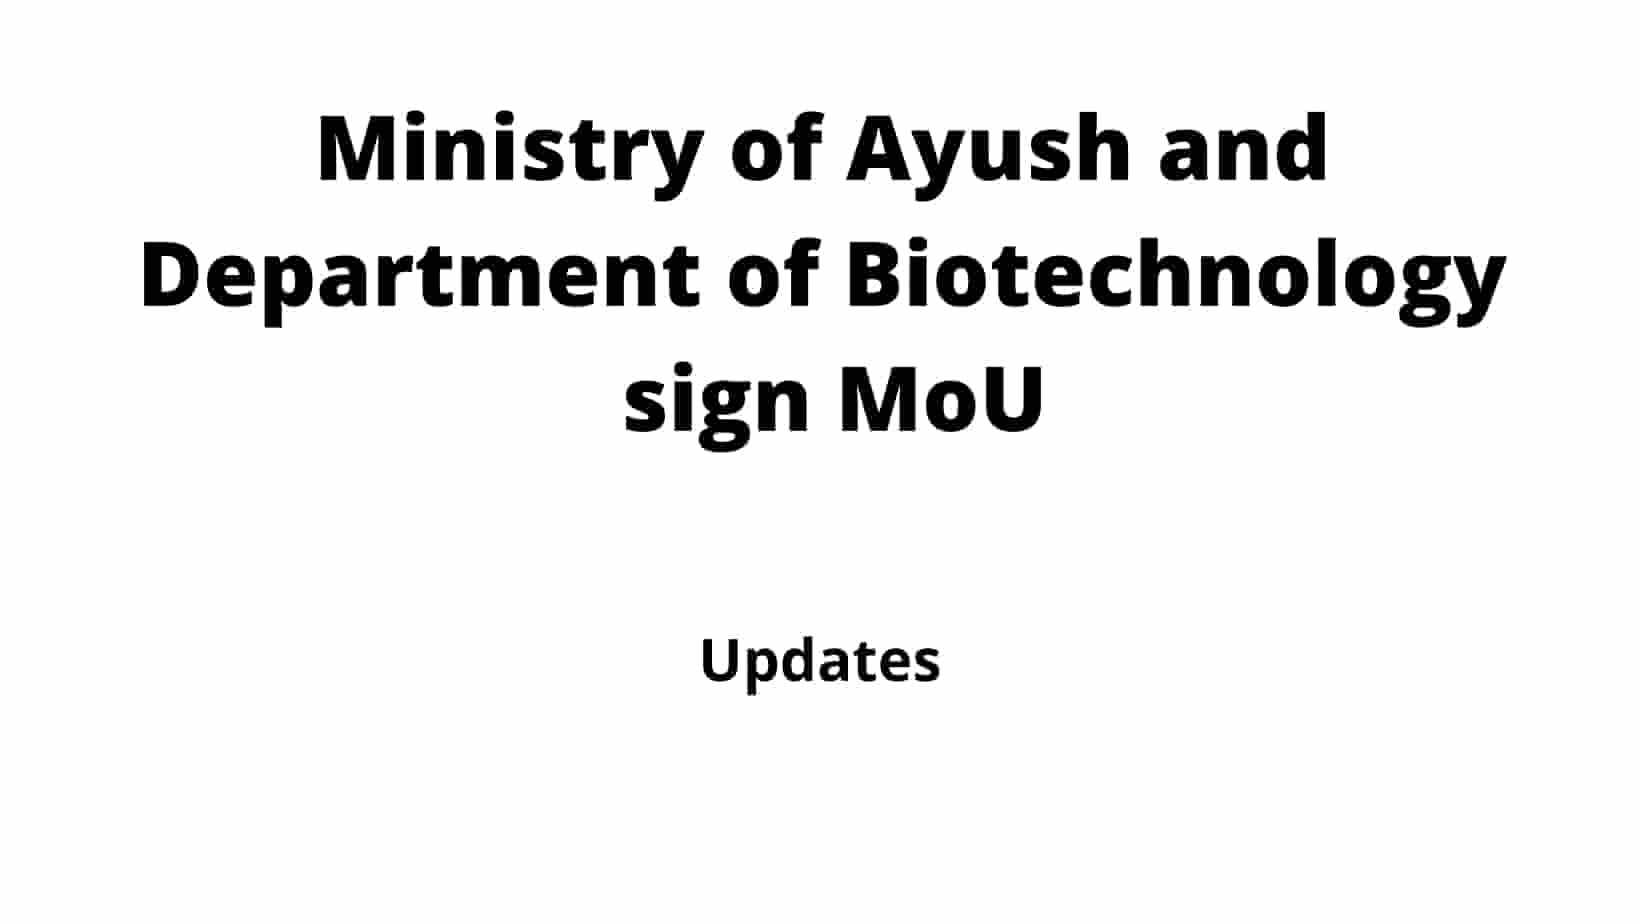 MoU between Ayush and Biotech Ministries